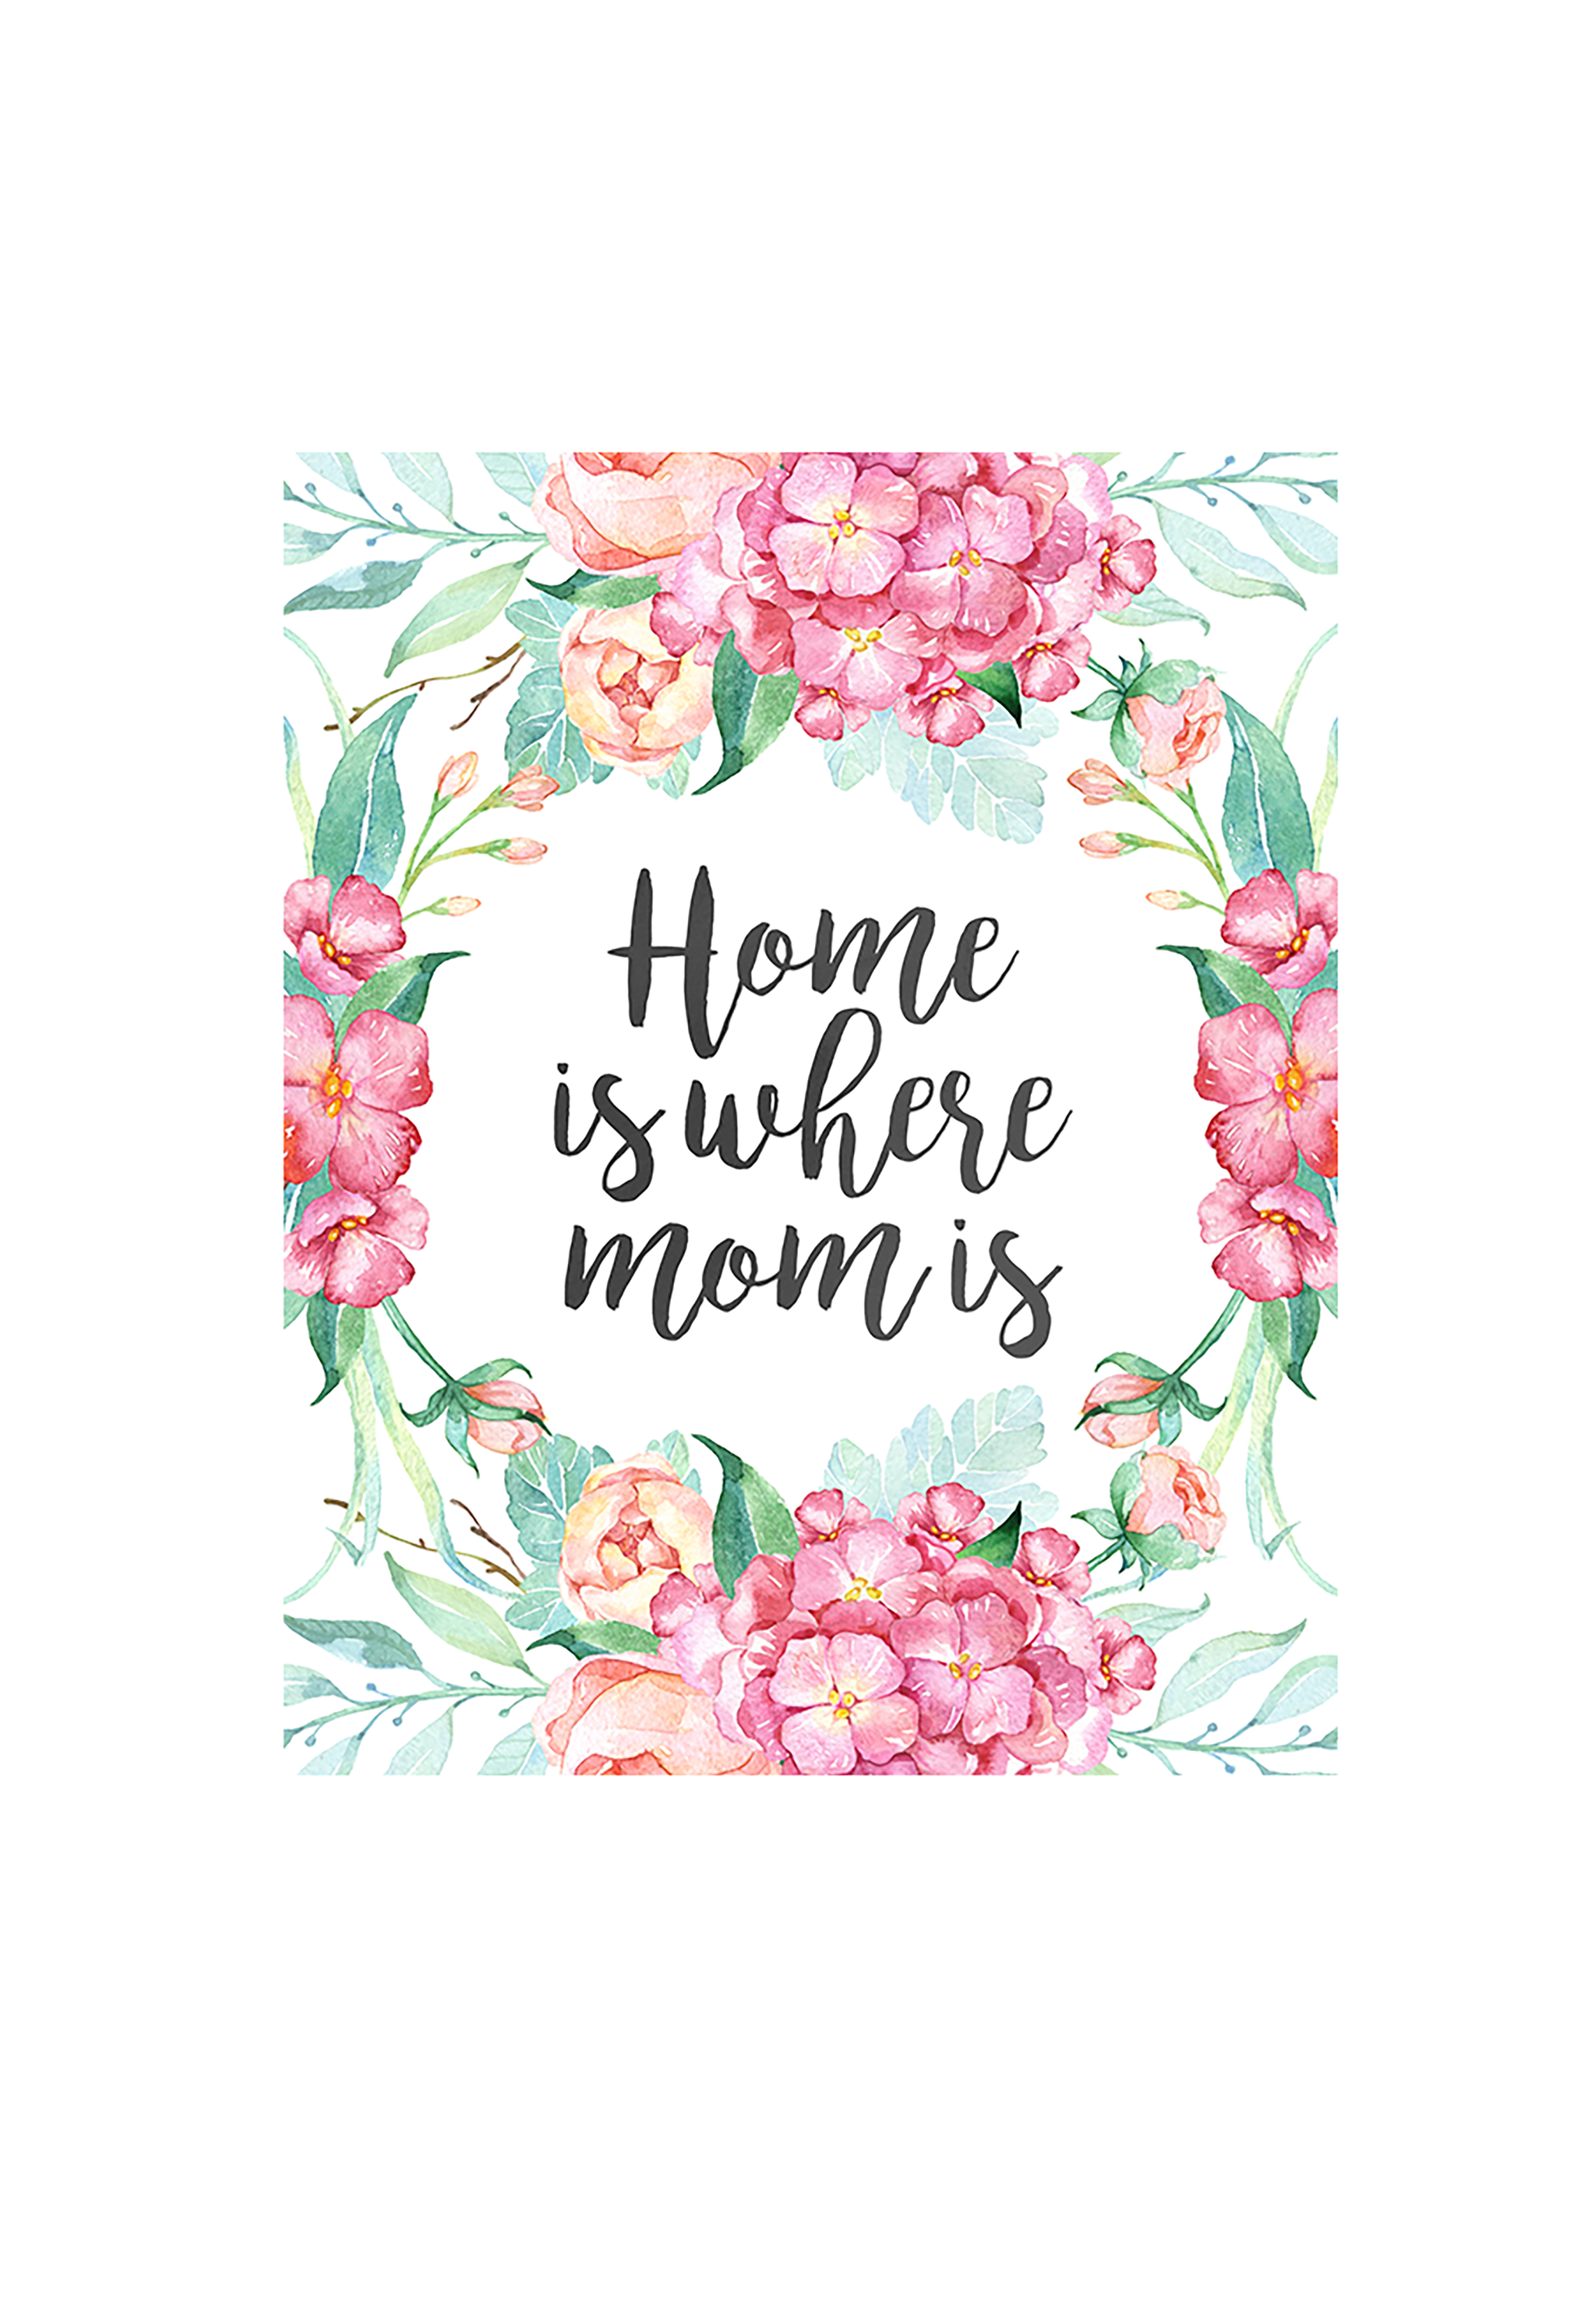 18 Mothers Day Cards - Free Printable Mother&amp;#039;s Day Cards - Free Printable Mothers Day Cards From The Dog